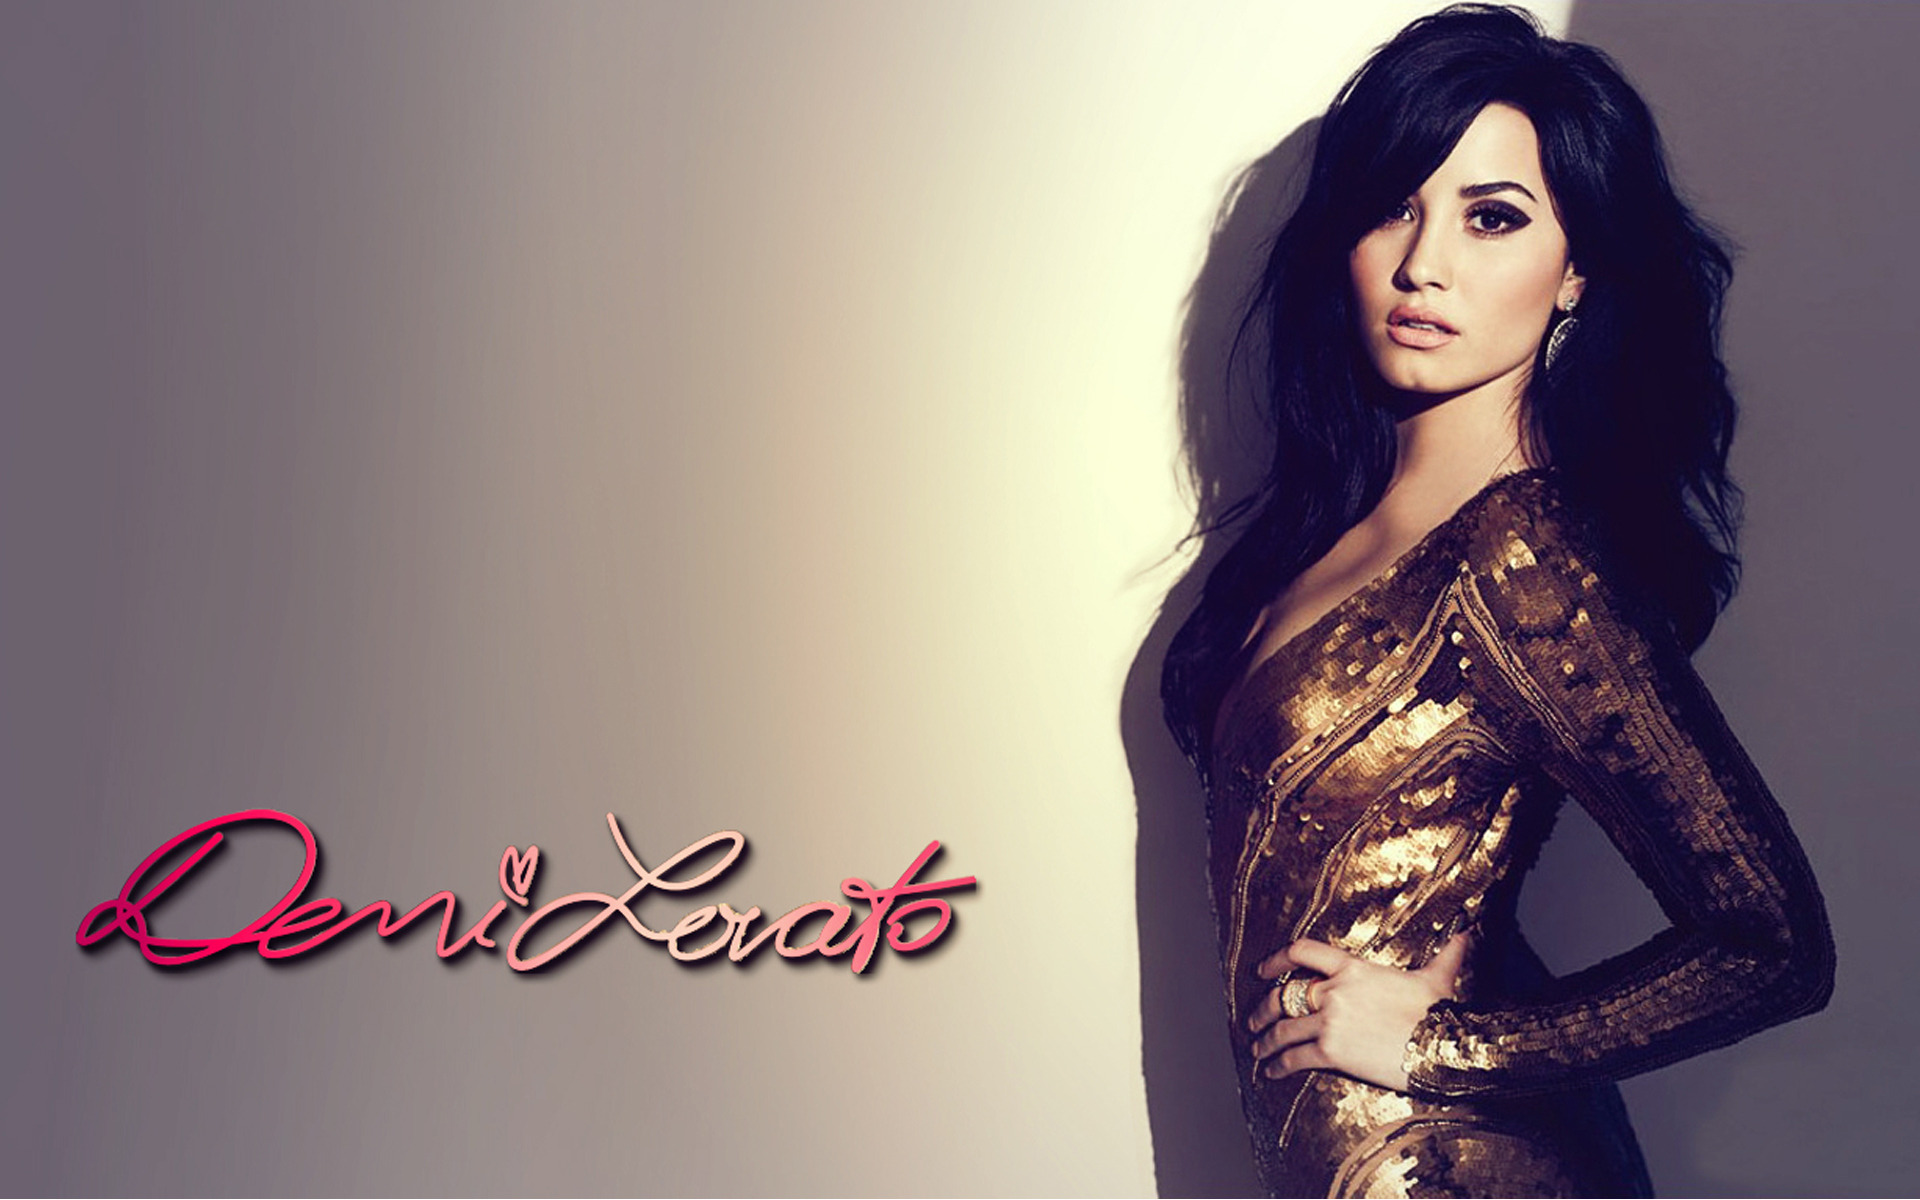 Demi Lovato Backgrounds   Wallpaper High Definition High Quality 1920x1200